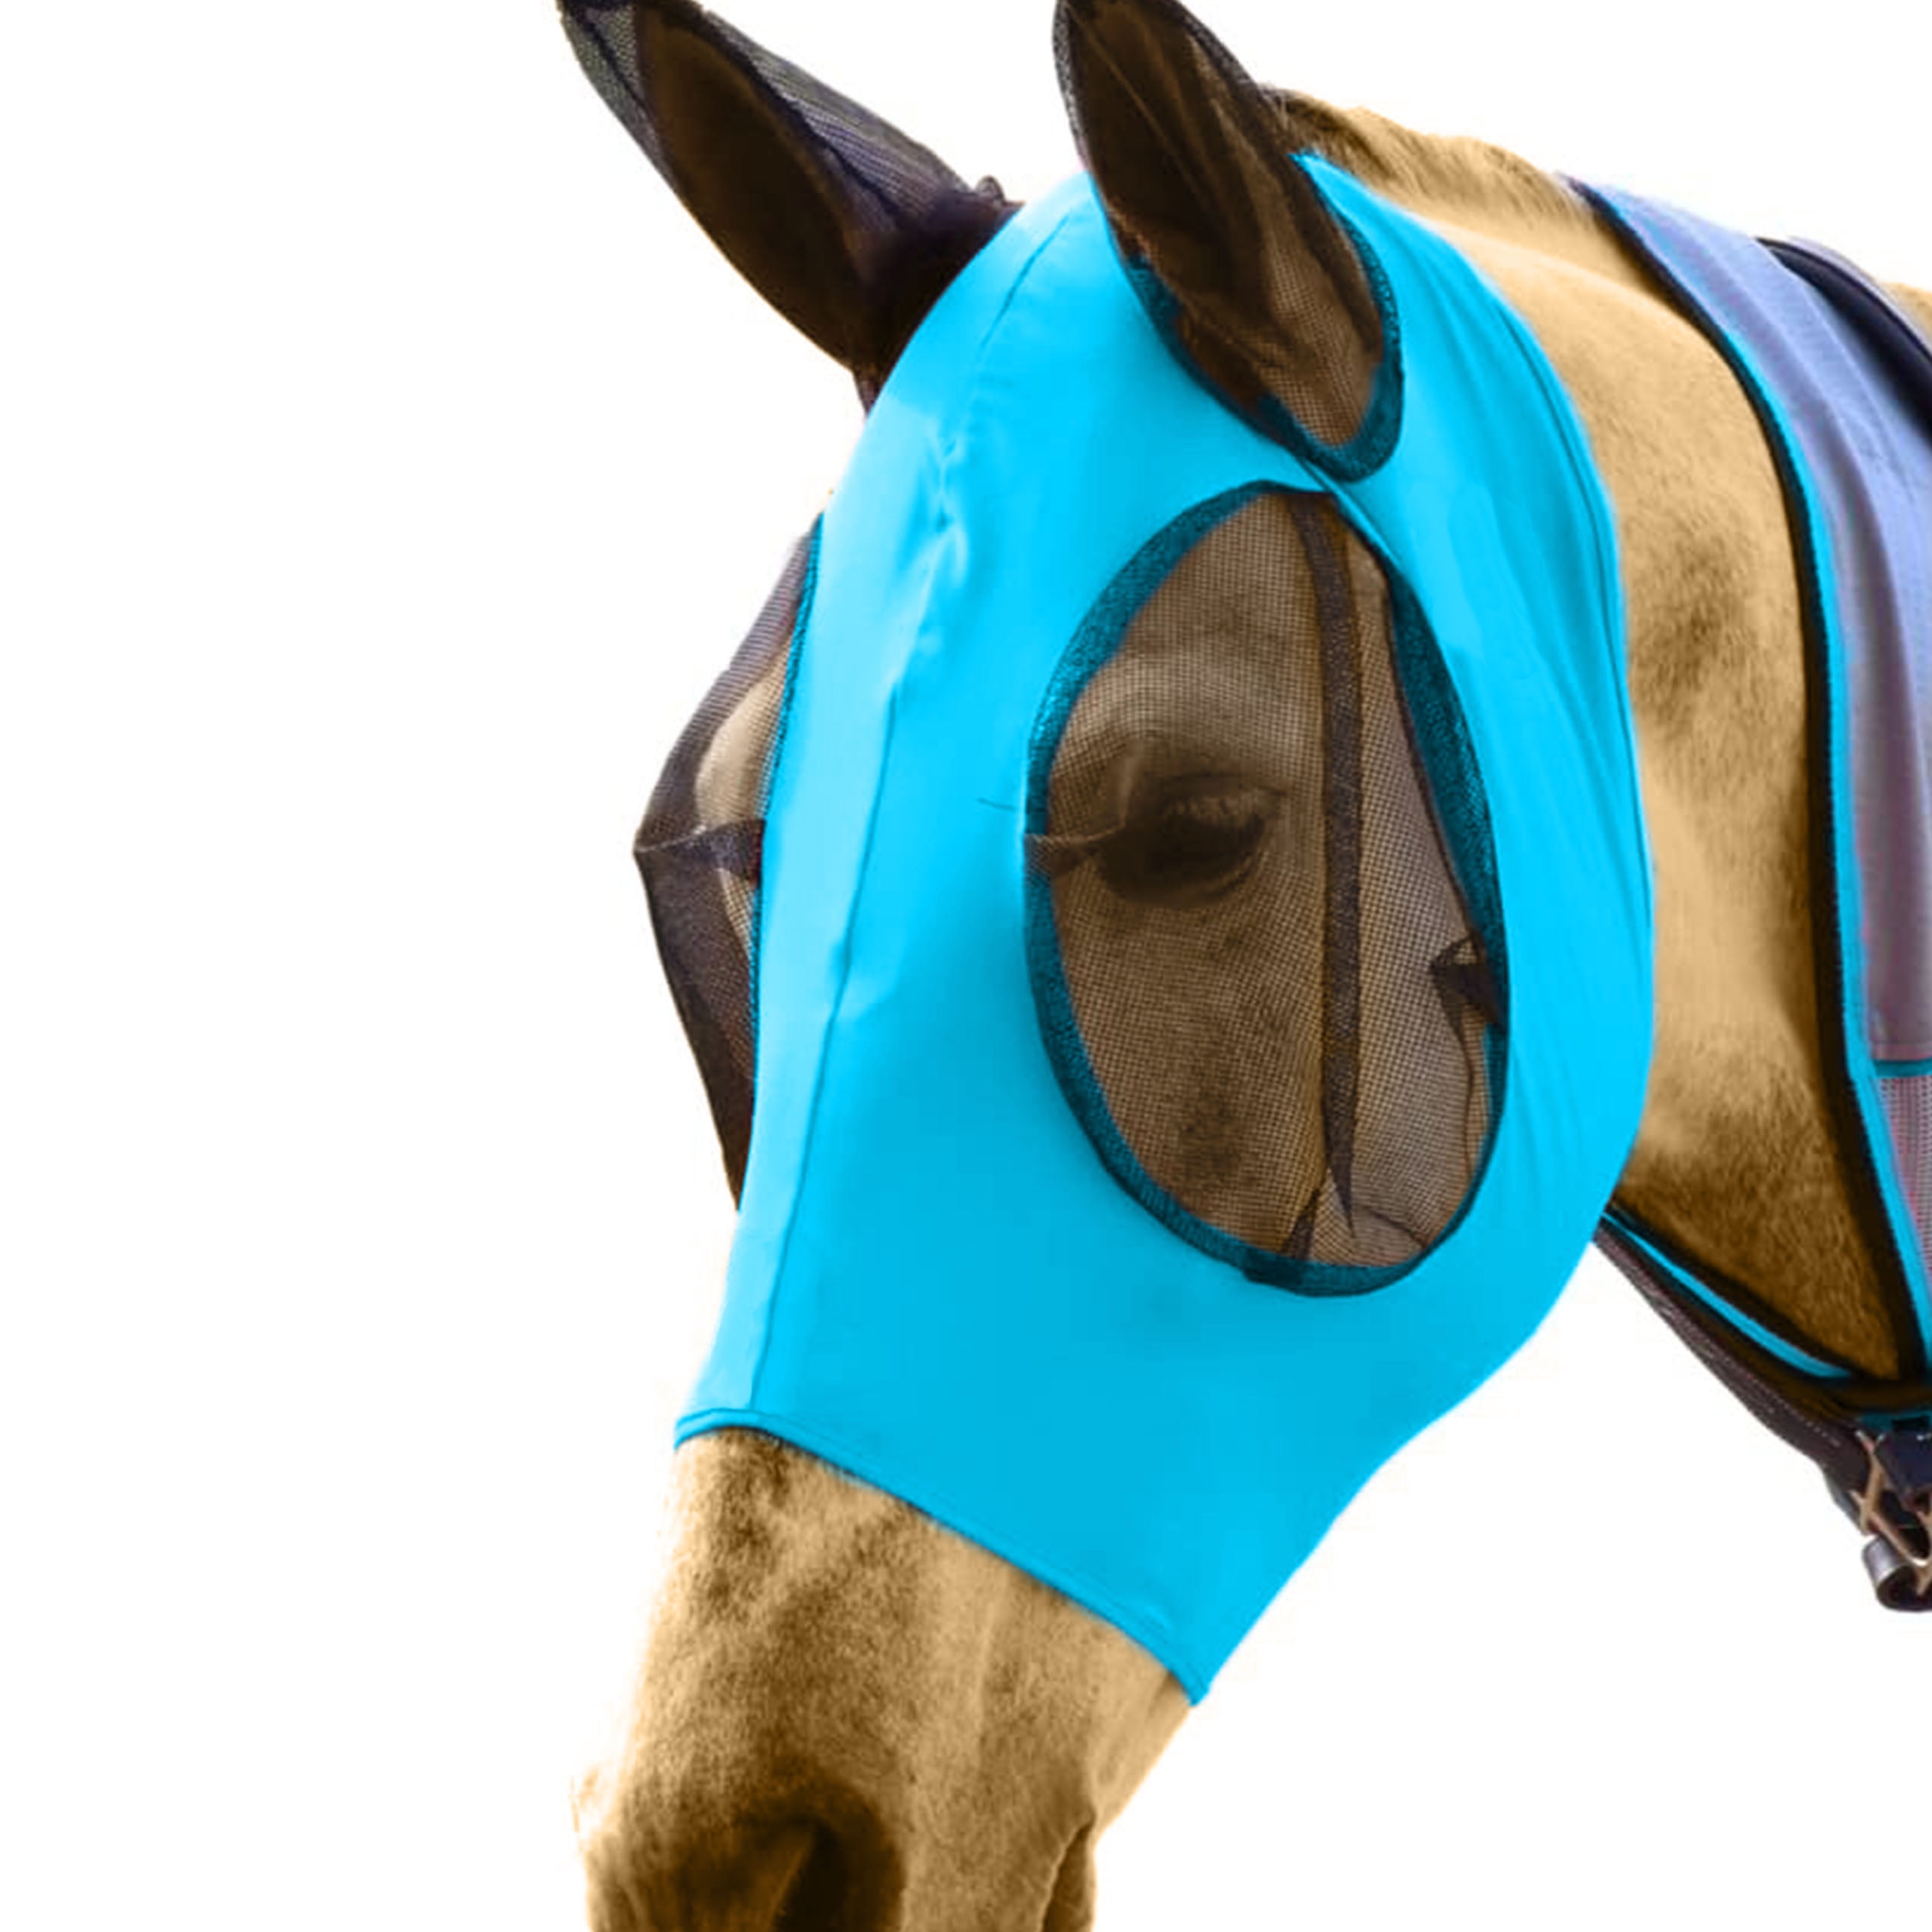 1 X Horse Mesh Fly Mask with Ears Breathable Soft Lycra Mesh Mask hood Anti-UV 